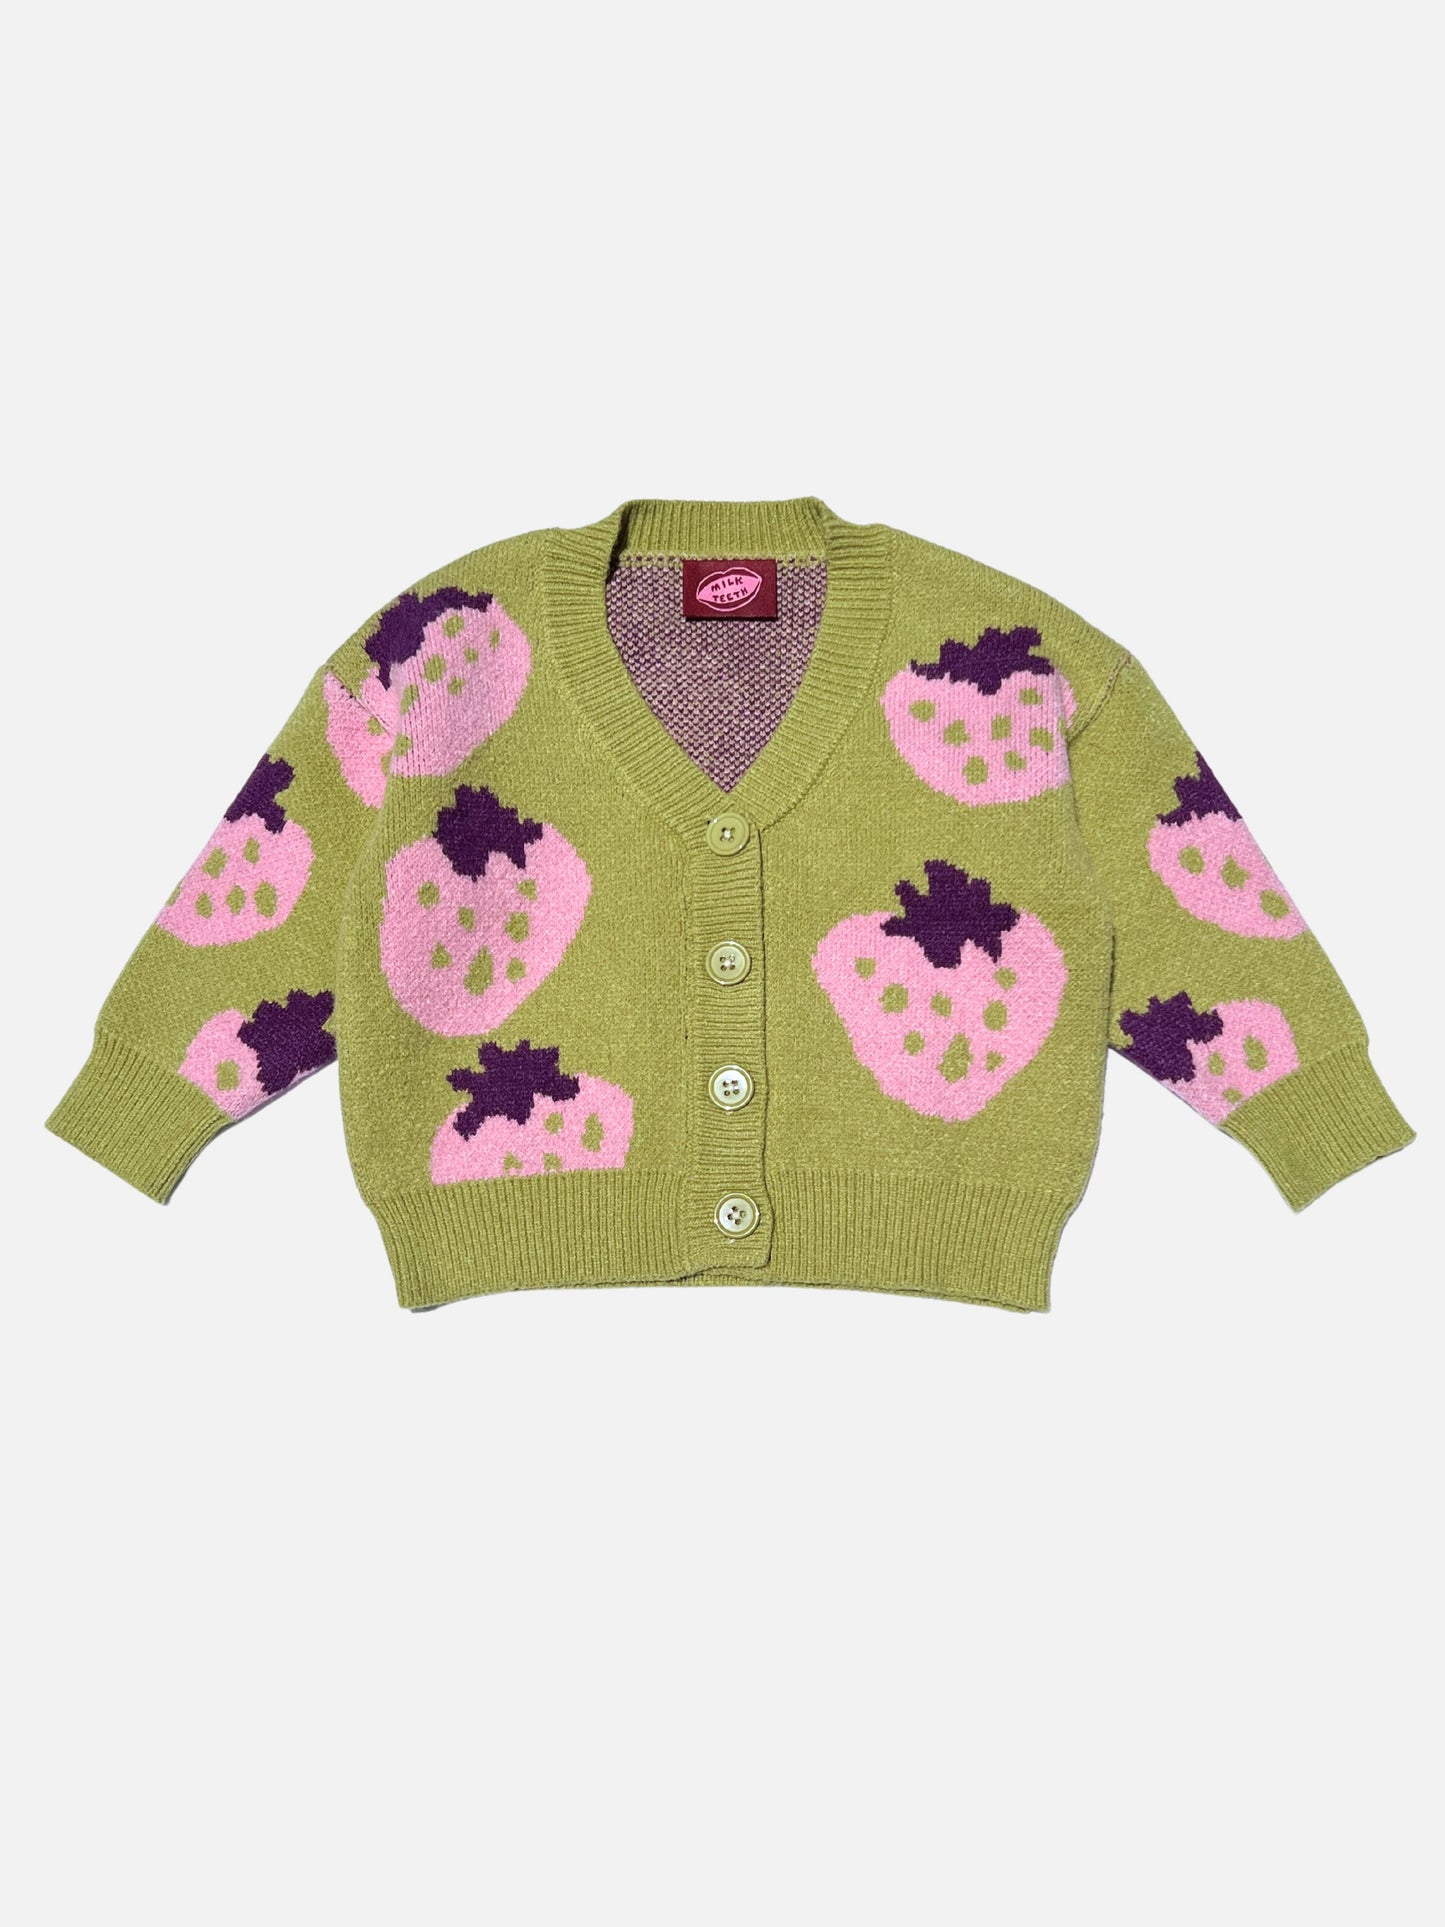 Pistachio | Front view of a kids v-neck cardigan in pistachio green with an all-over pattern of large pink strawberries with a purple leaf. Cardigan has 4 buttons.